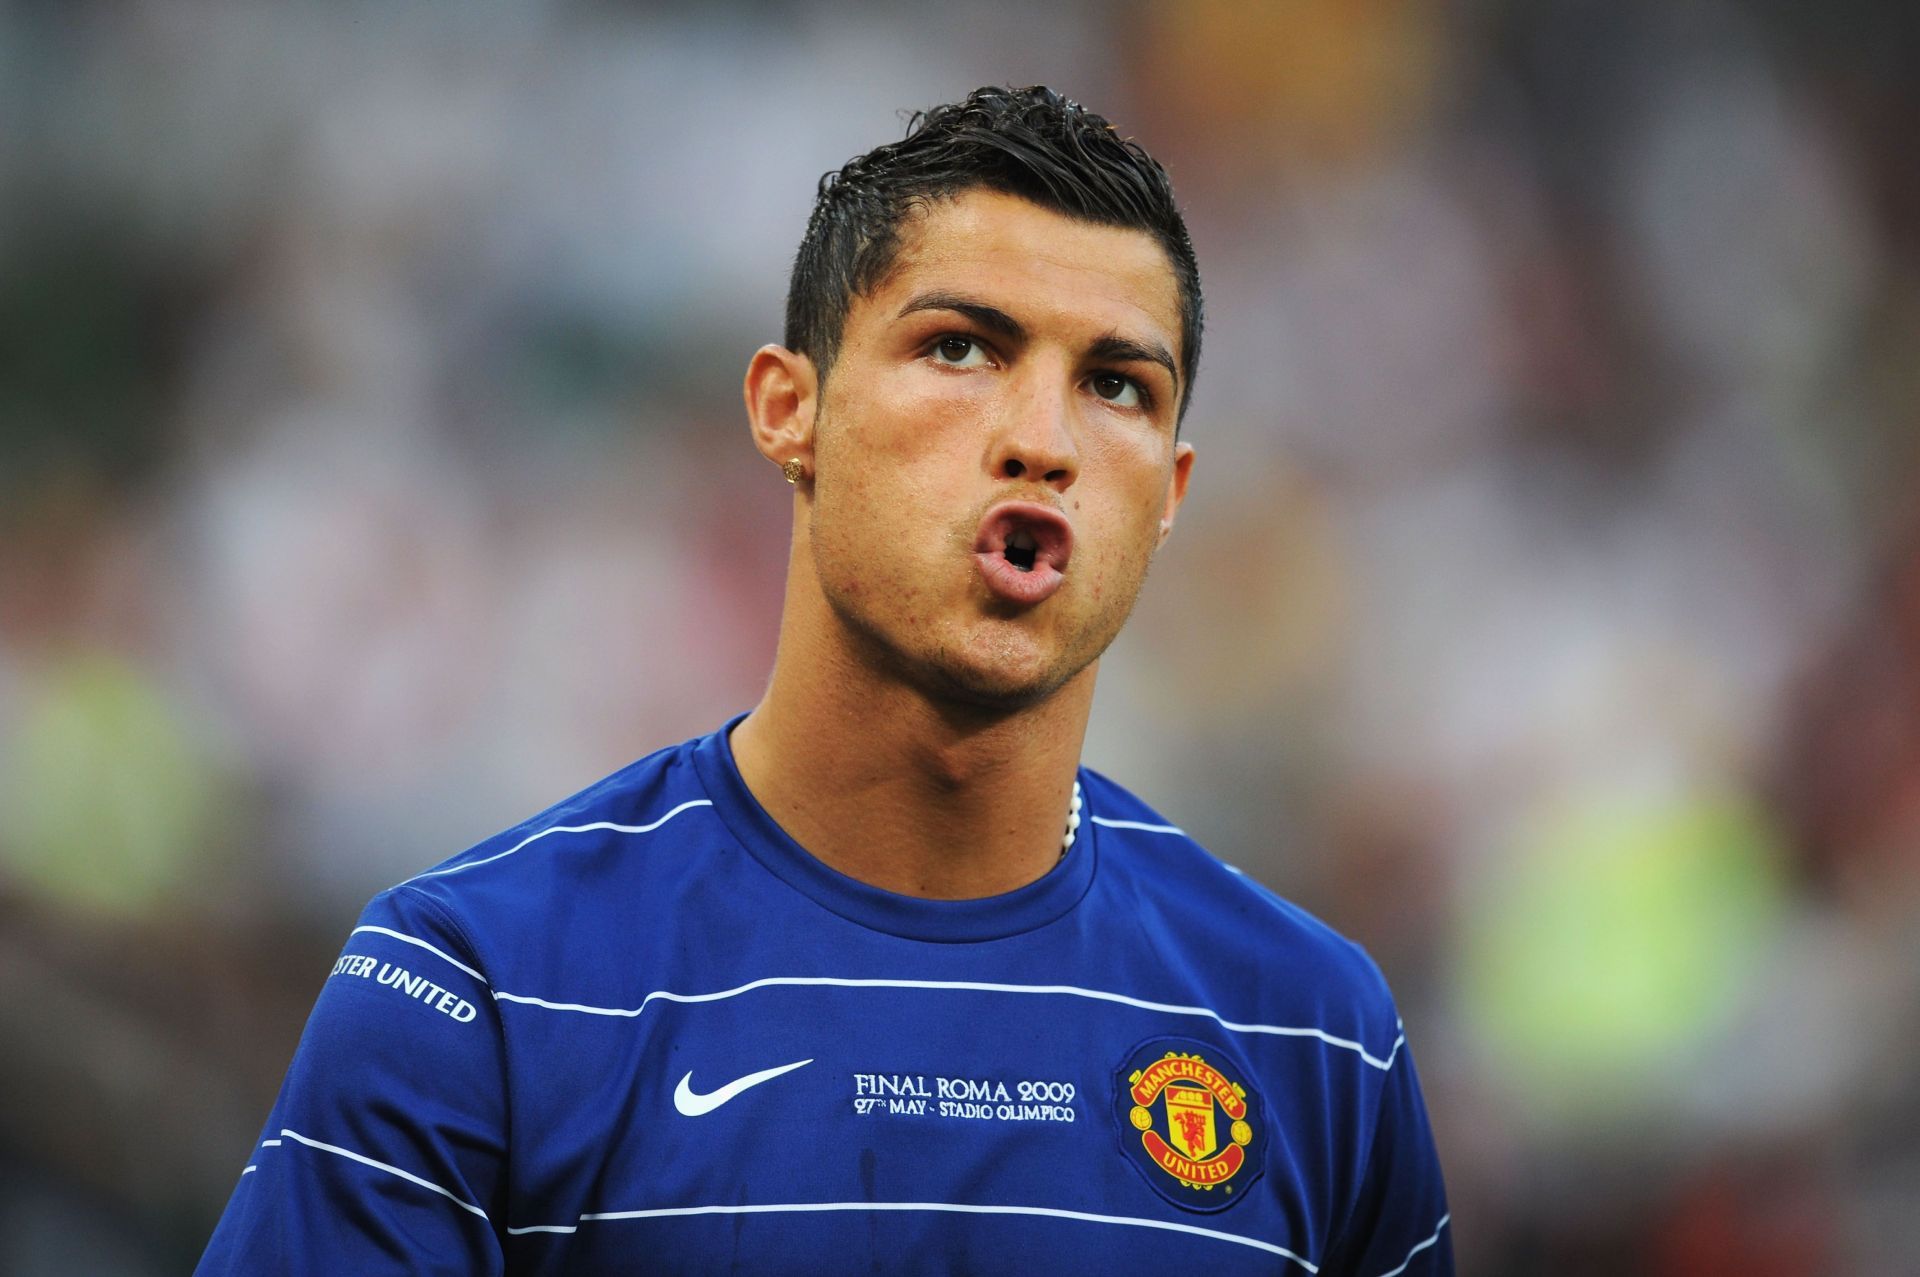 In 2009 Cristiano was seen struggling, particularly with his national side